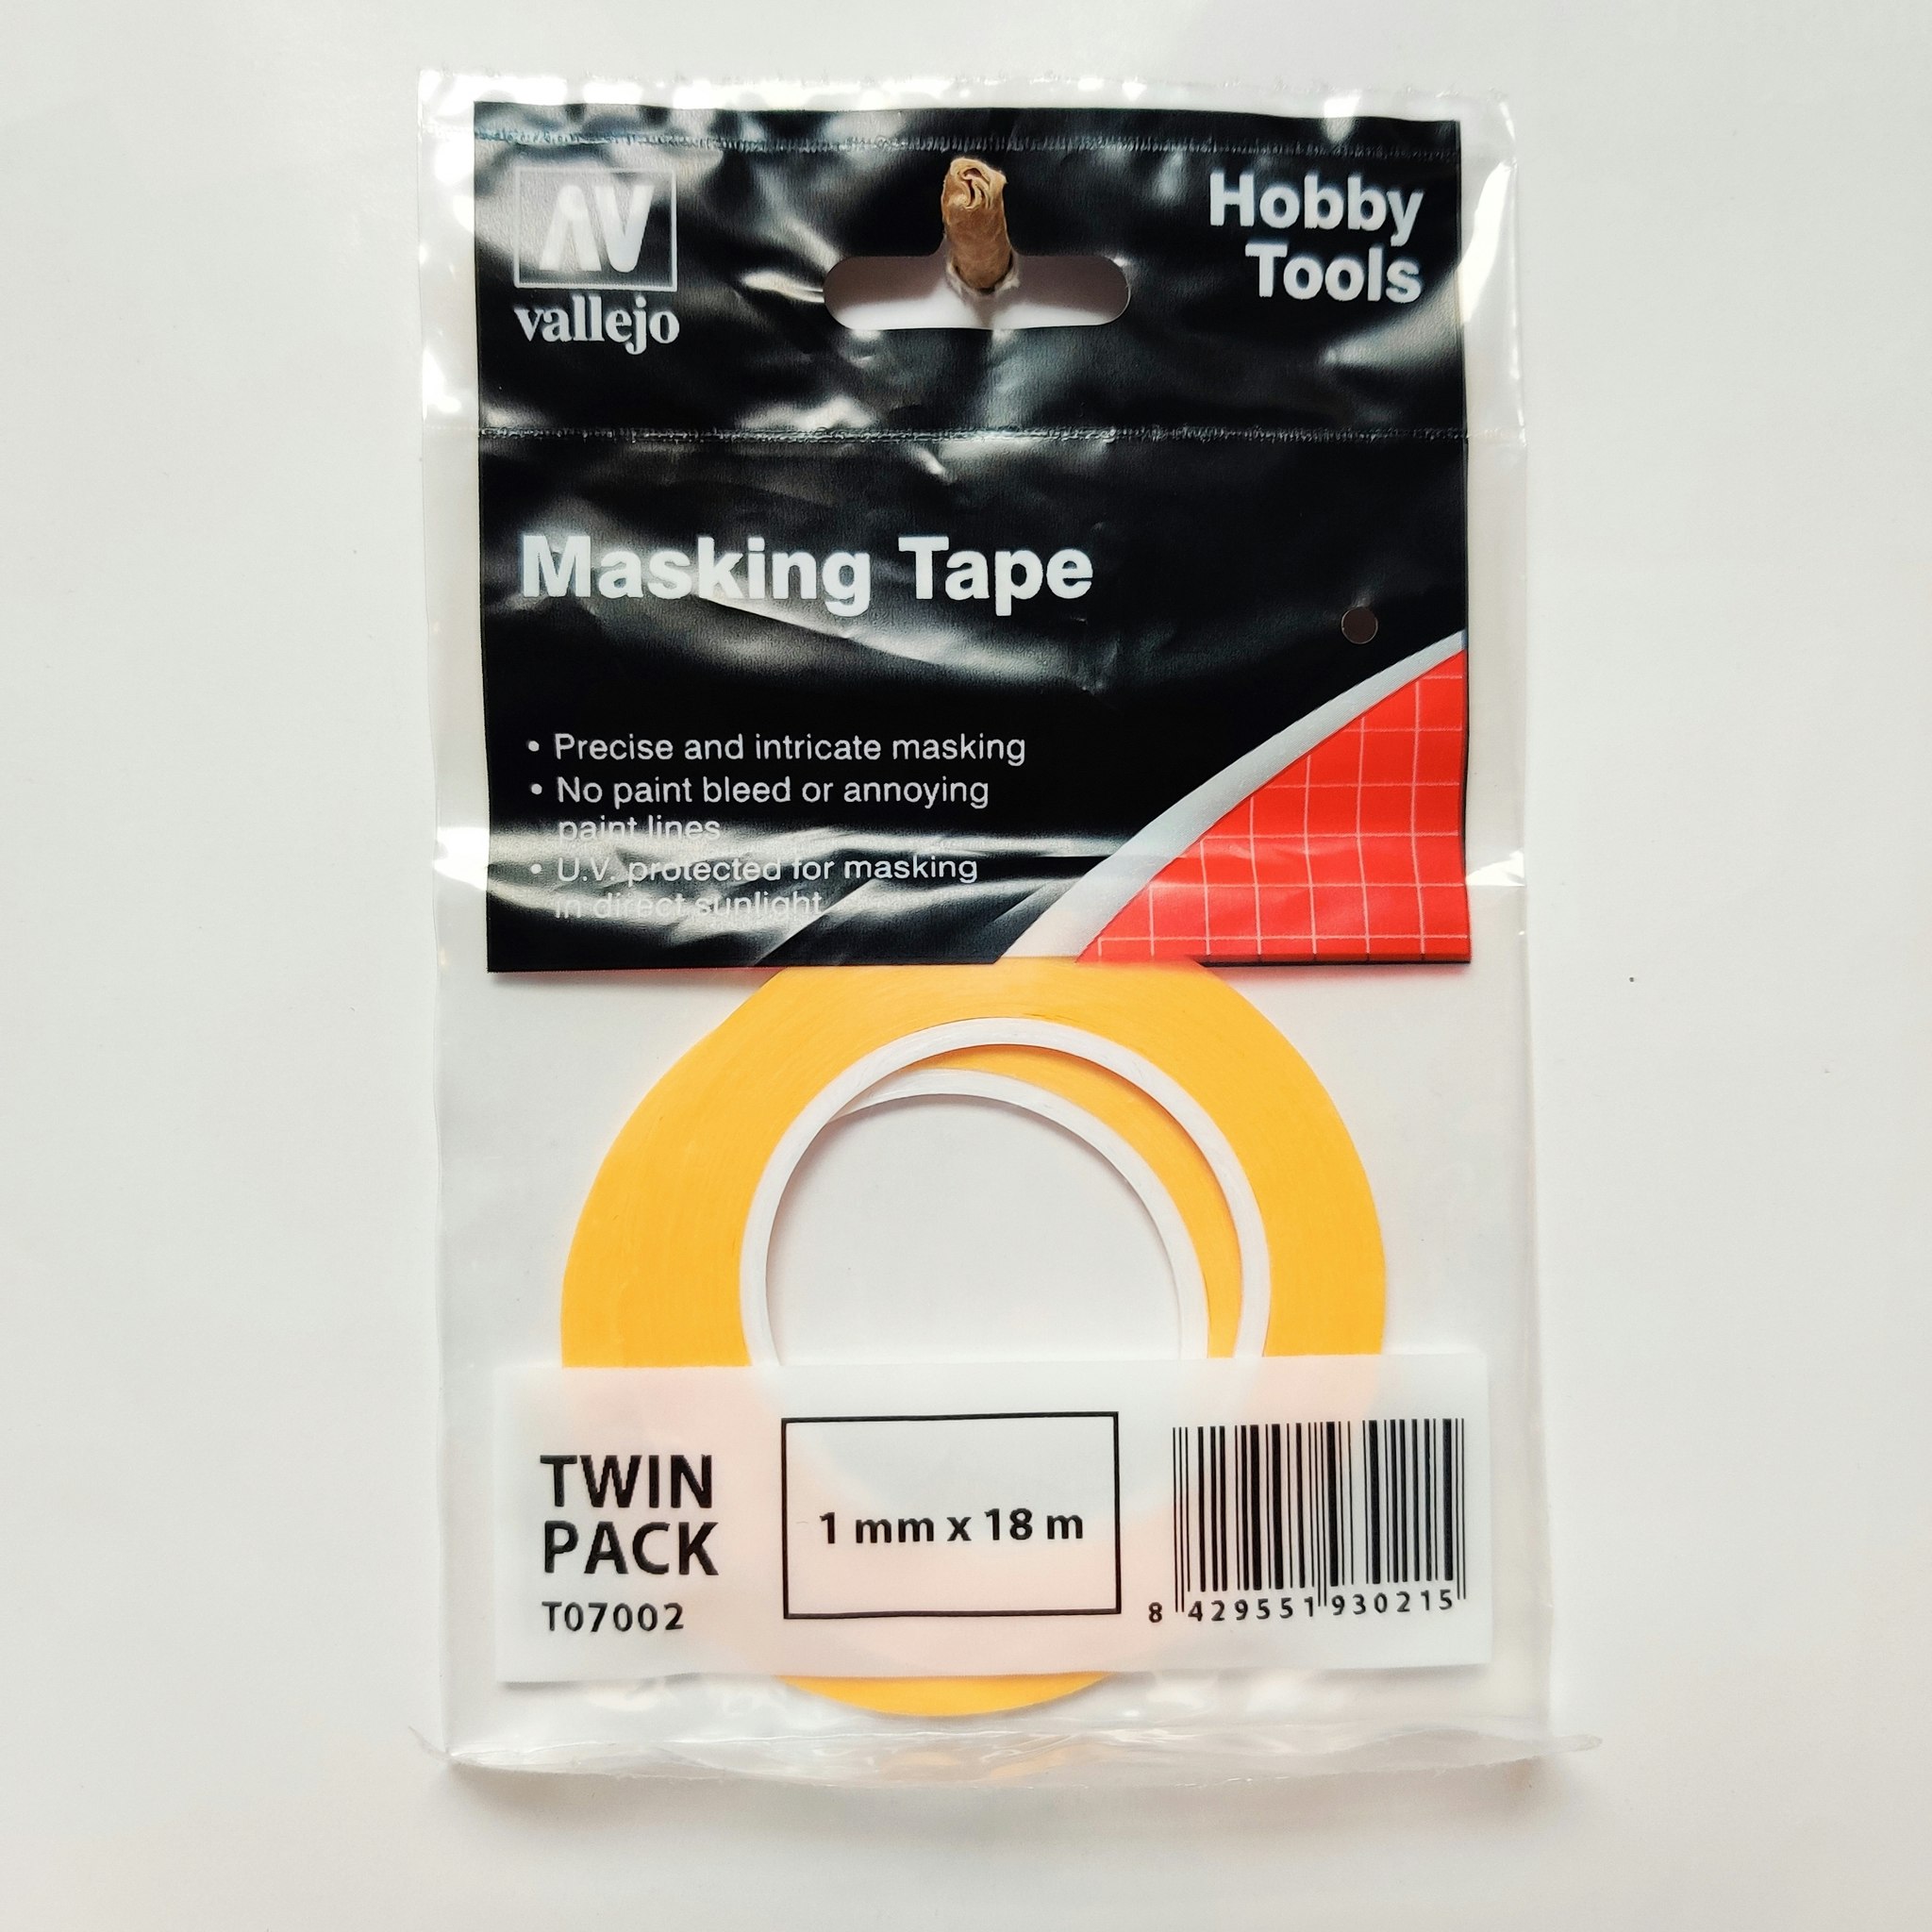 Vallejo Precision Masking Tape 1mm x 18m - twin pack T07002